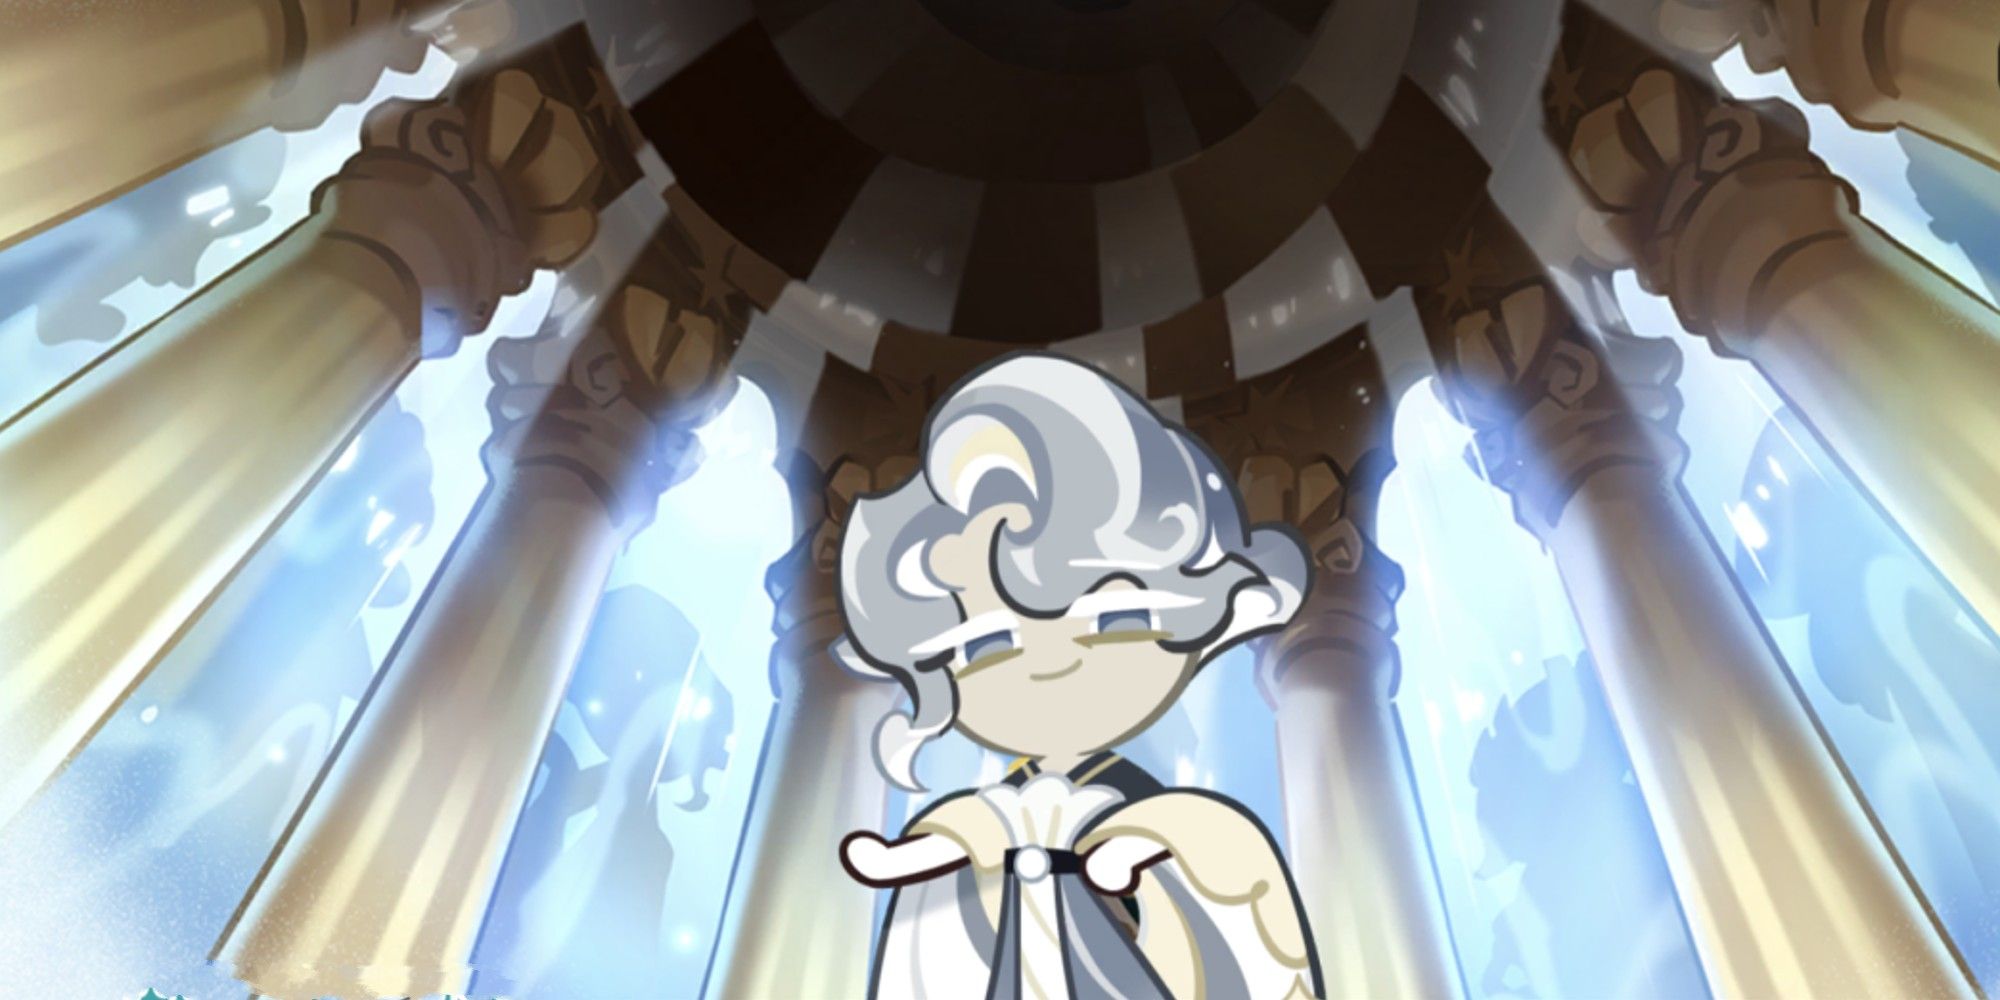 Oyster Cookie stands against high pillars while she looks down on you